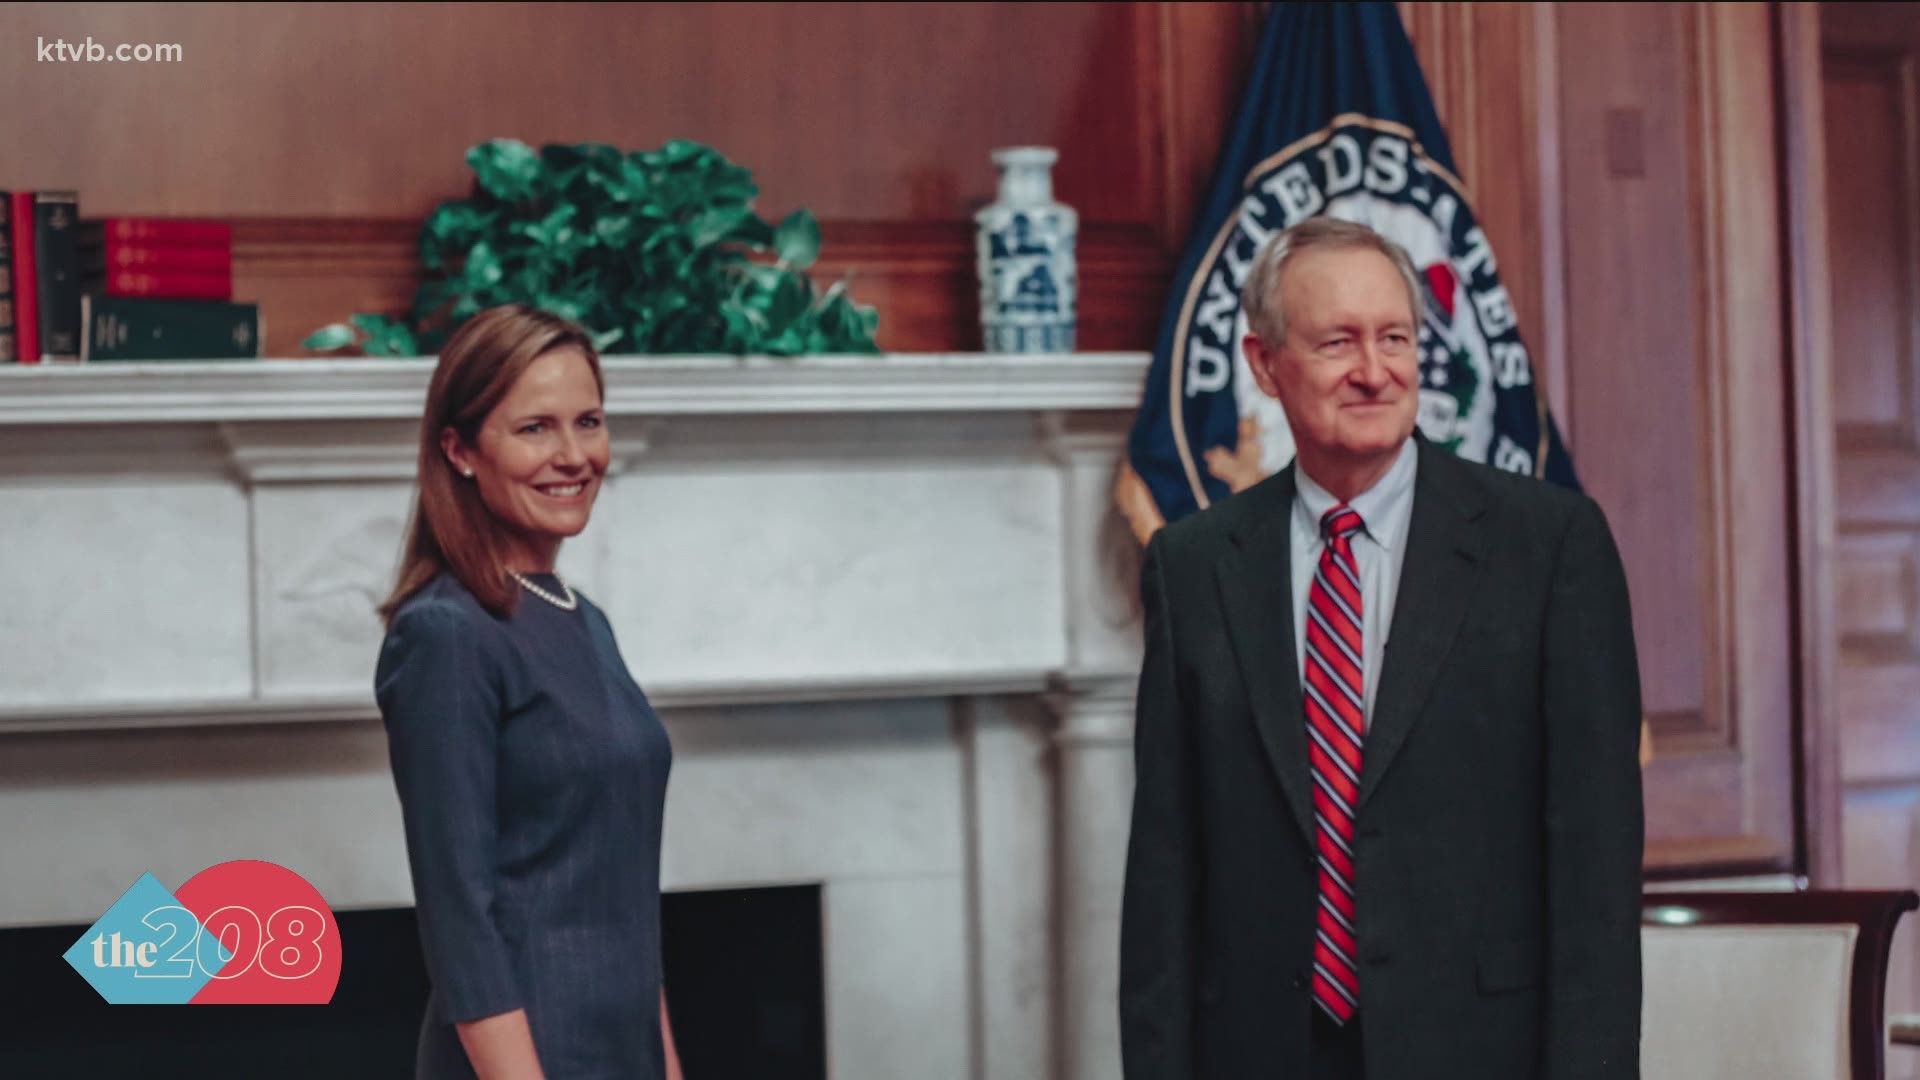 Sen. Crapo met with Barrett Tuesday and told us why he is impressed by her credentials.